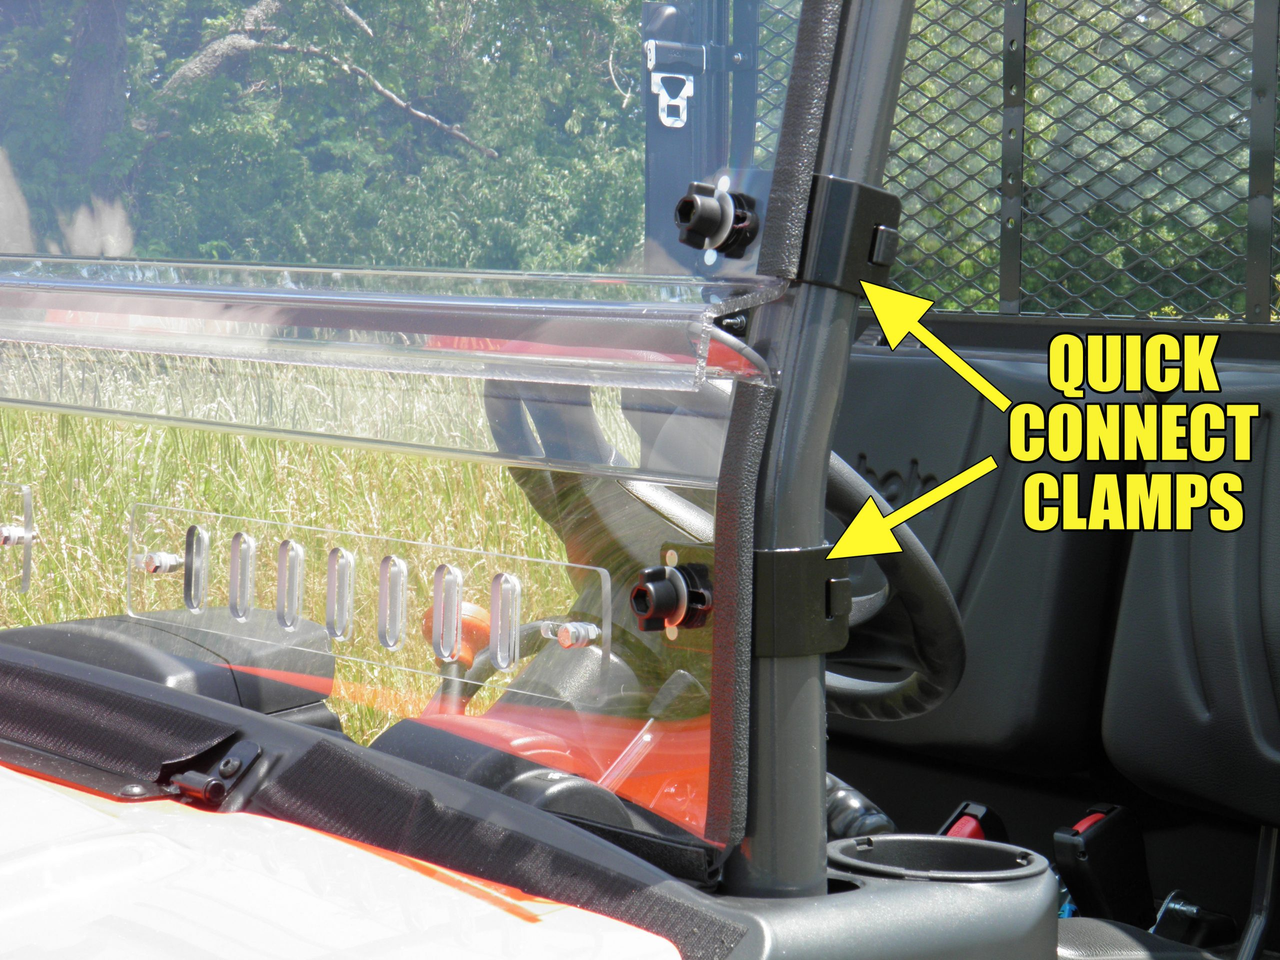 3 Star side x side Polaris Ranger Full-Size 570 Lexan polycarbonate windshield quick connect clamps